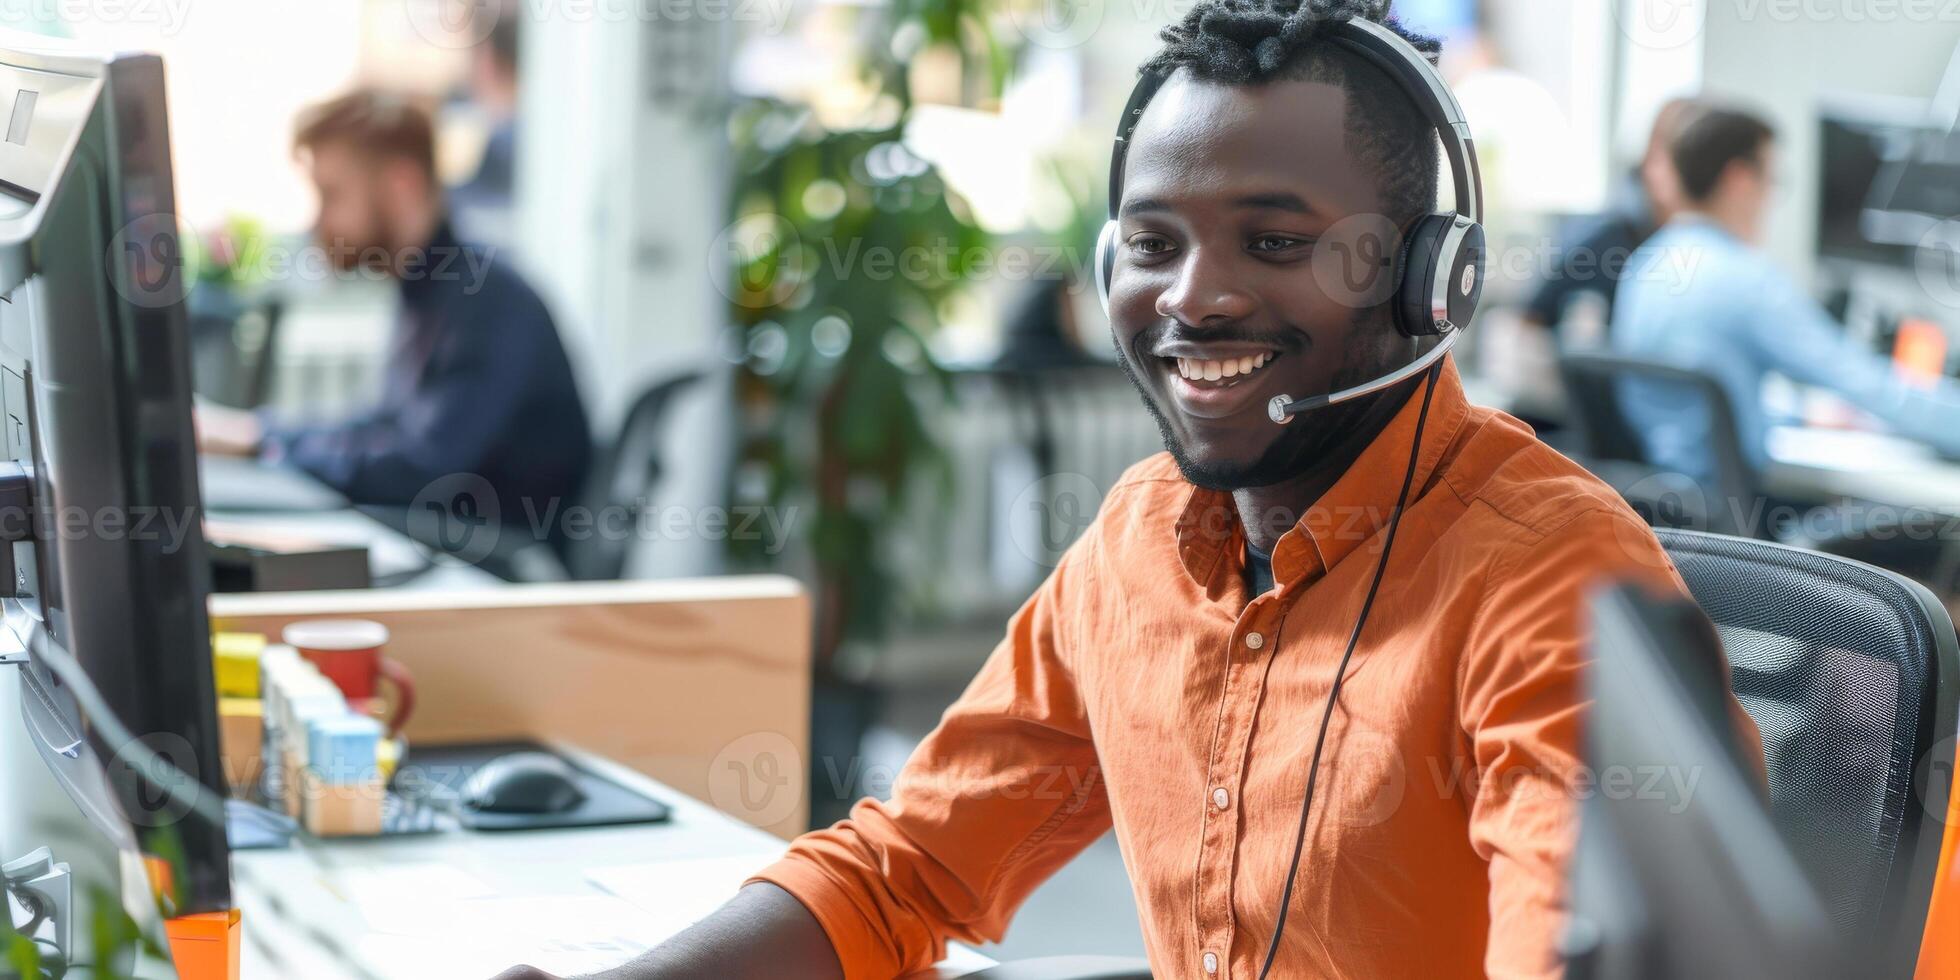 AI generated A man is shown wearing a headset and sitting in front of a computer. He appears focused and engaged, likely involved in customer service photo